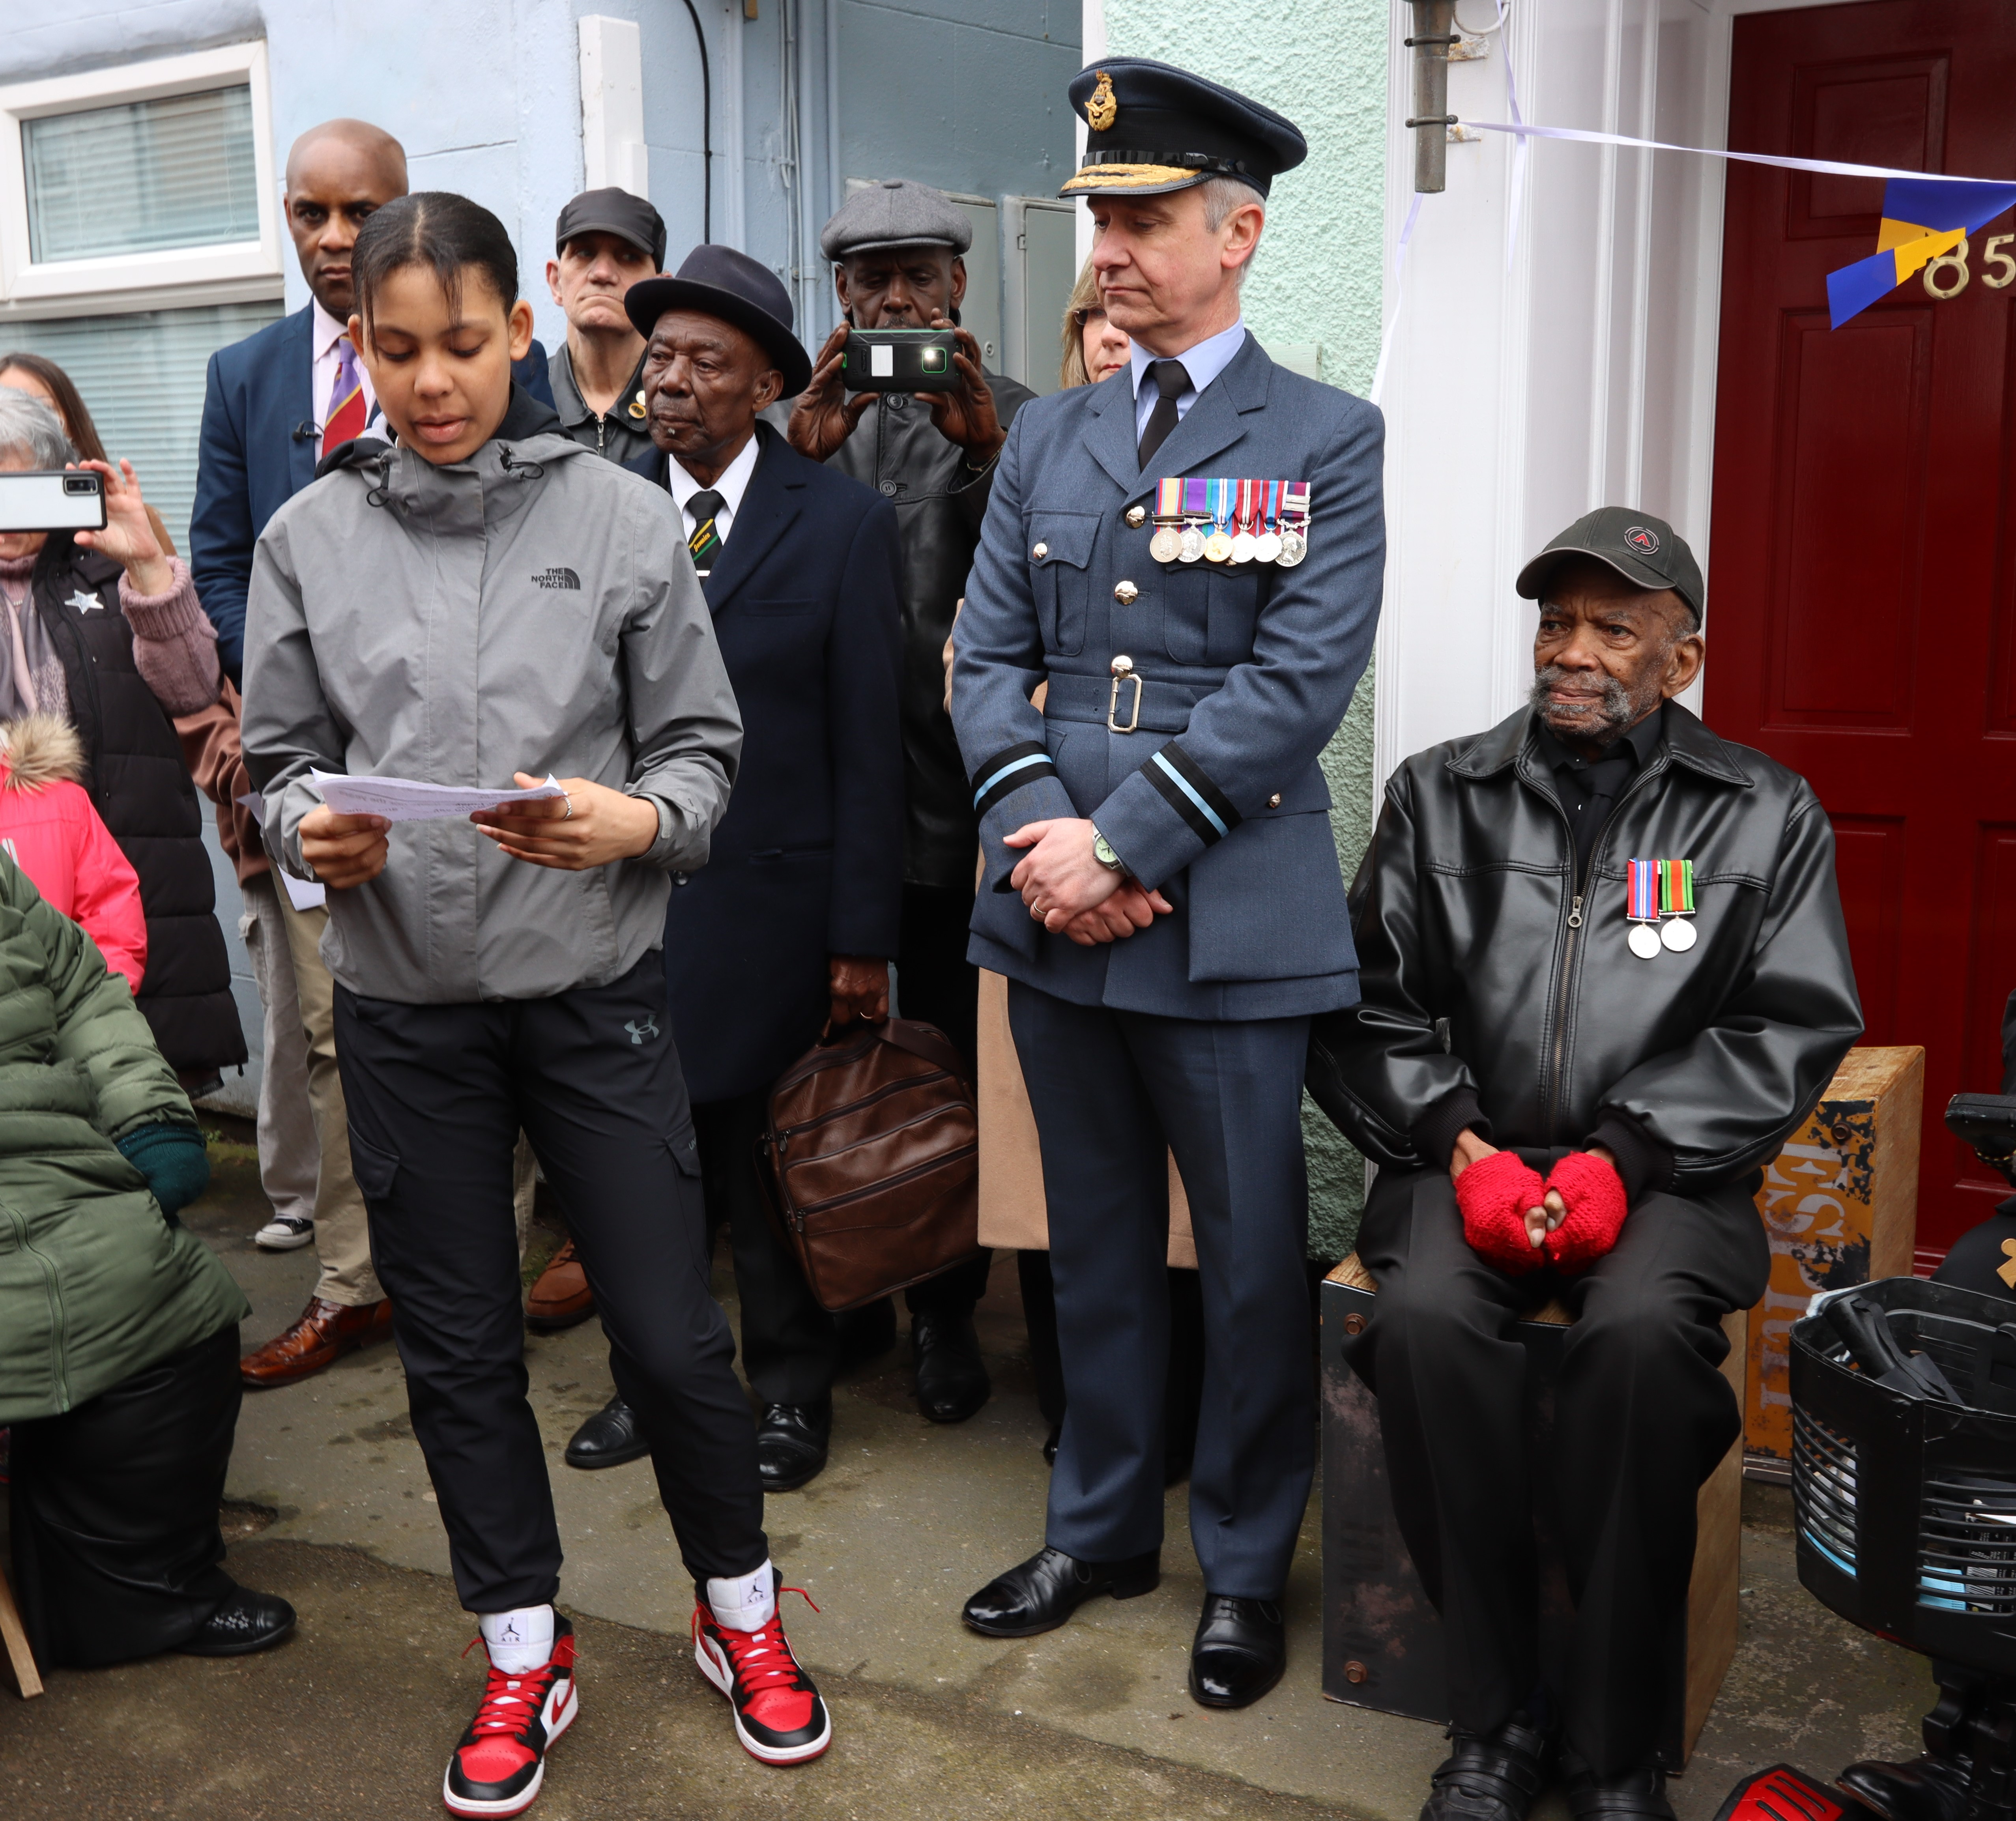 #Image shows RAF personnel standing with civilians and veterans.